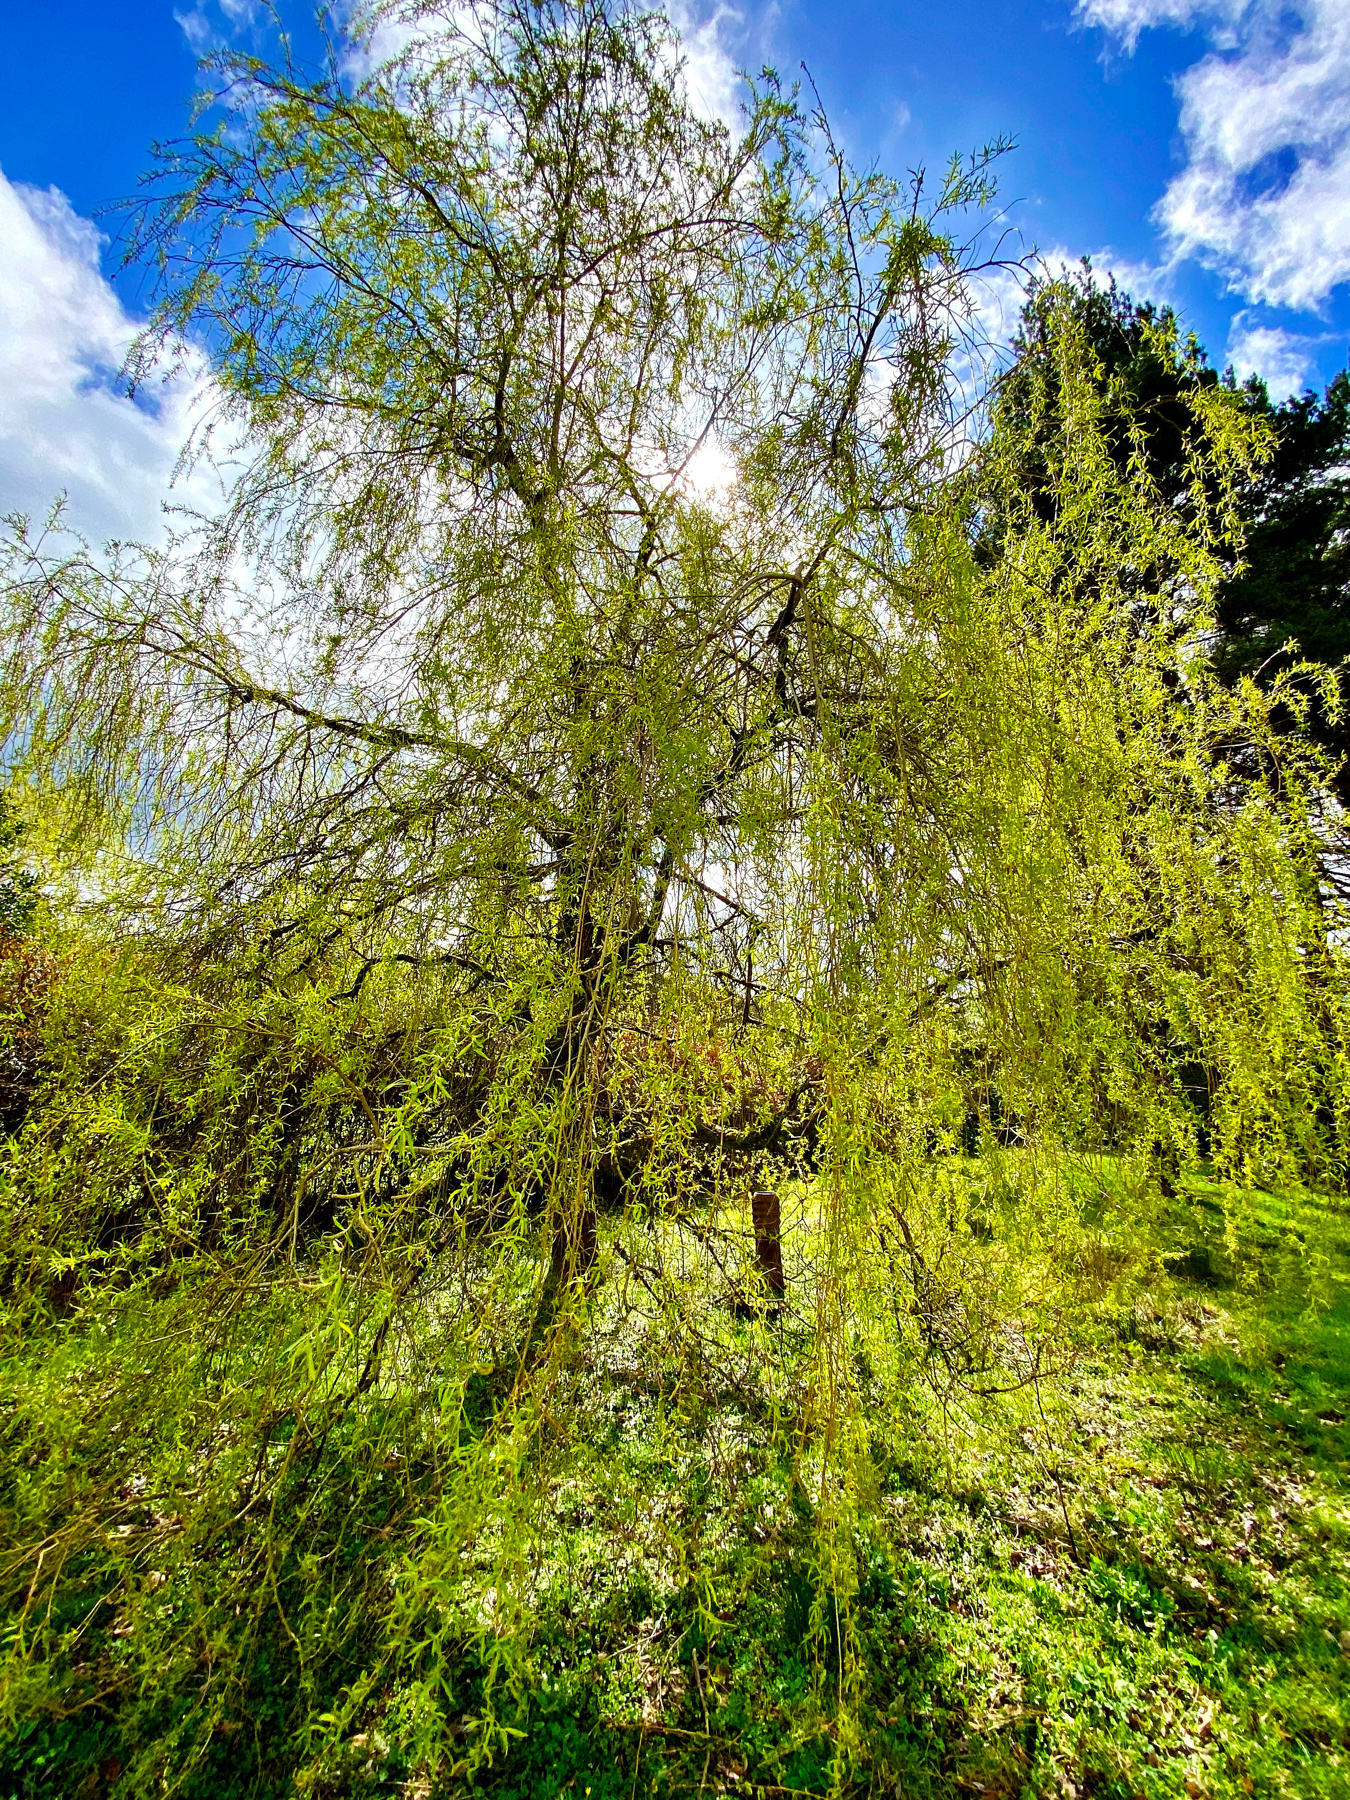 A lush, green weeping willow tree with delicate branches under a bright blue sky with fluffy white clouds.